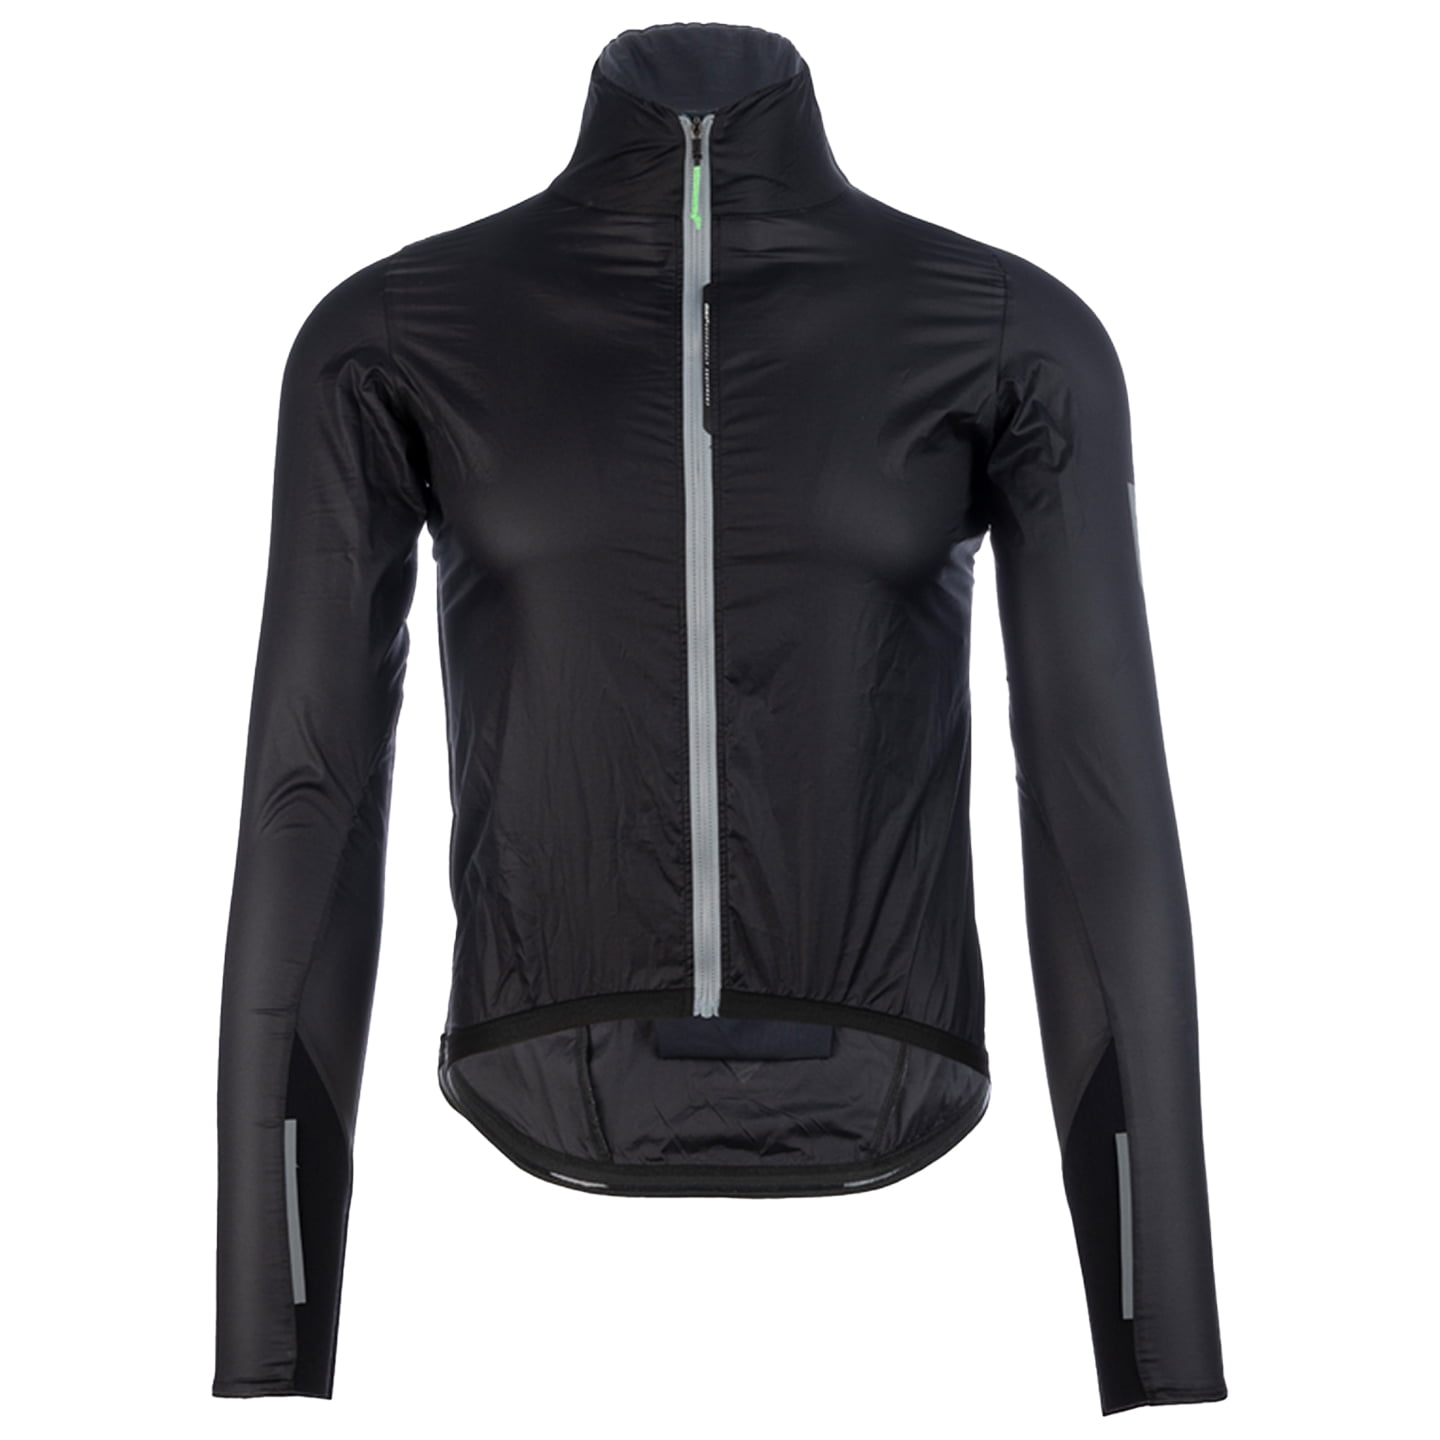 Q36.5 Air Wind Jacket Wind Jacket, for men, size 2XL, Cycle jacket, Cycling clothing